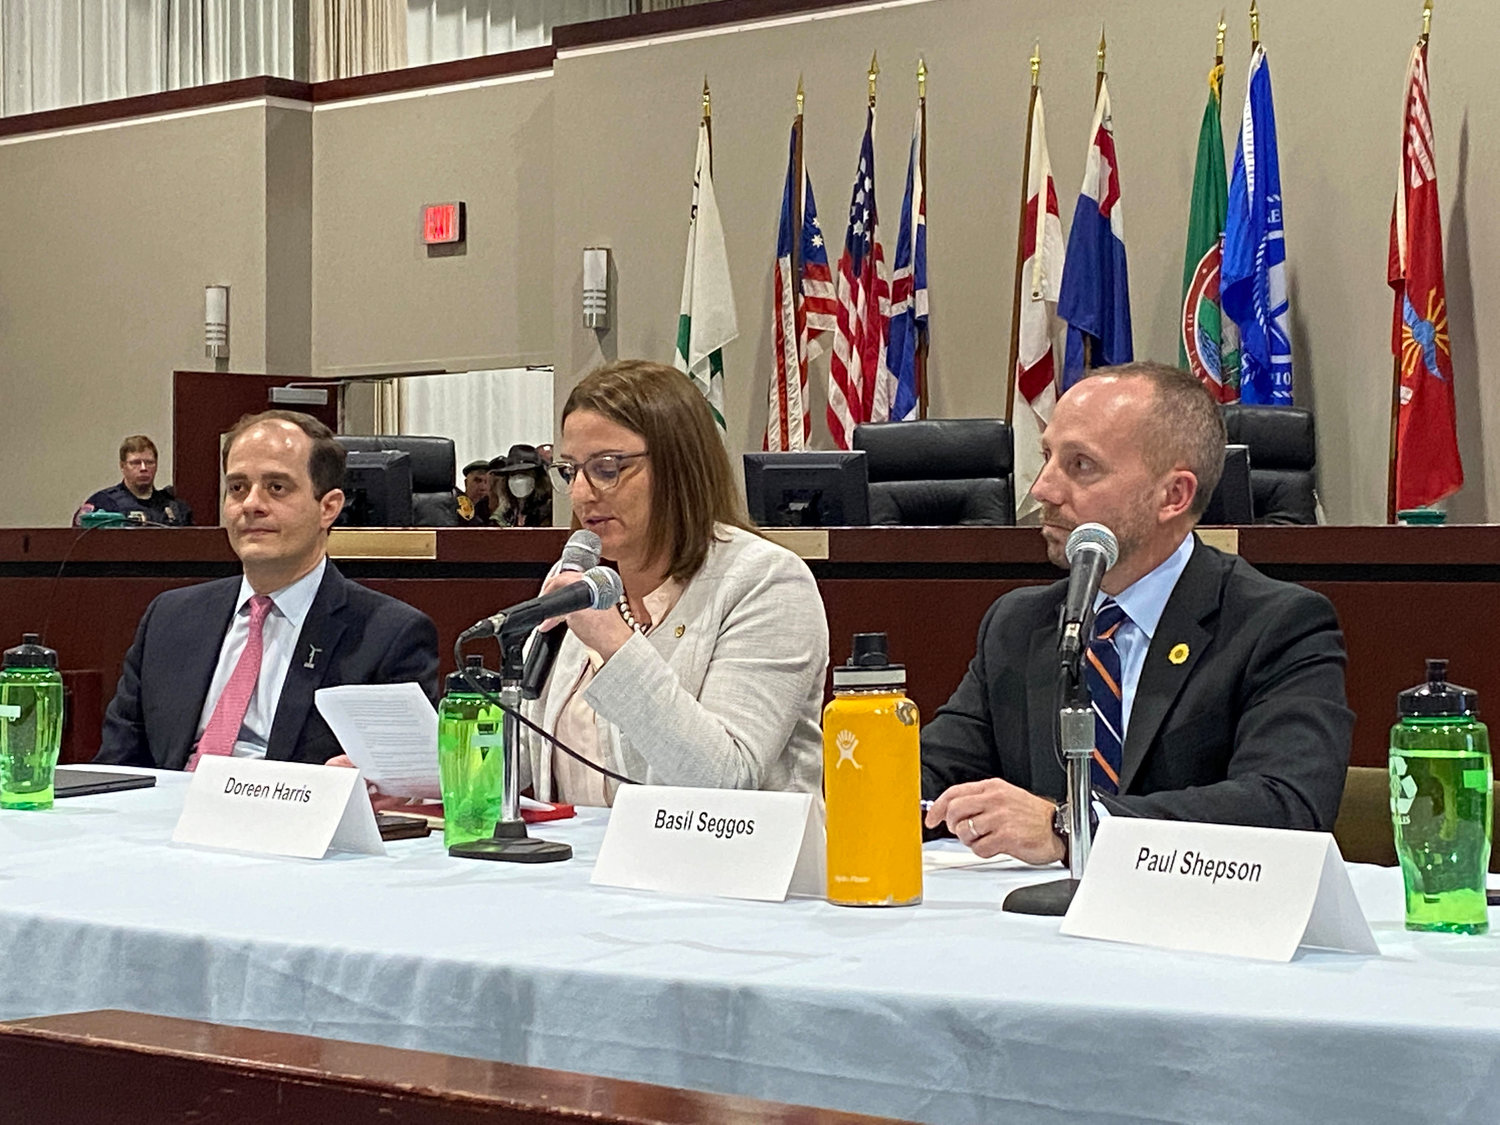 A public hearing for the Climate Action Council was held on April 6. The ambitious plan sets out to achieve net-zero emissions by the middle of the century.